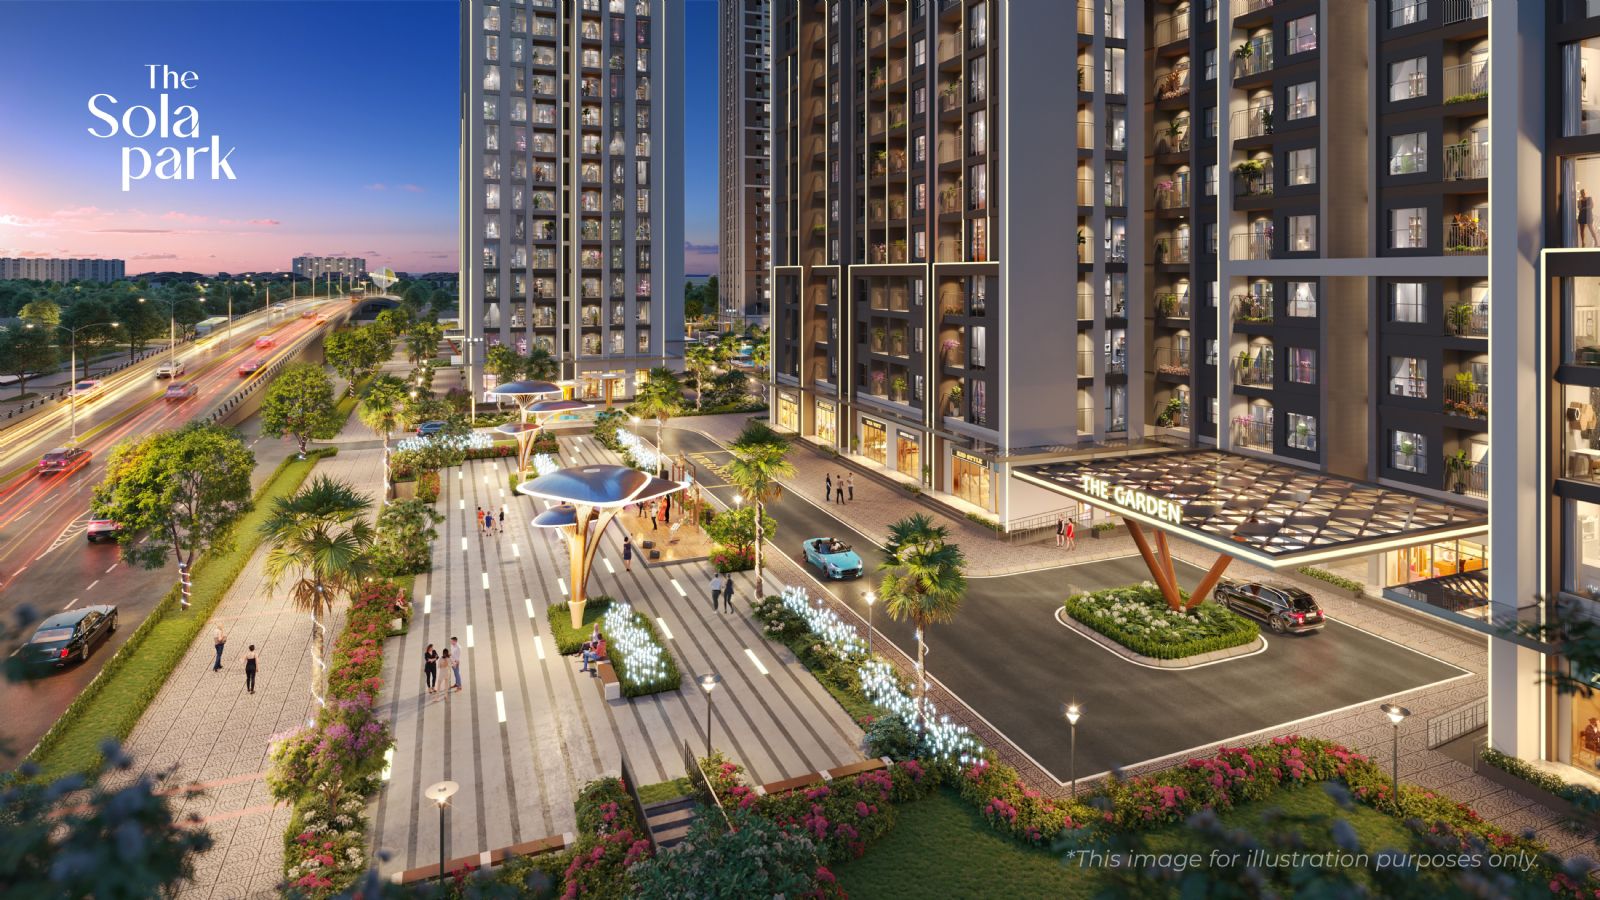 The amenities at The Sola Park Imperia Smart City